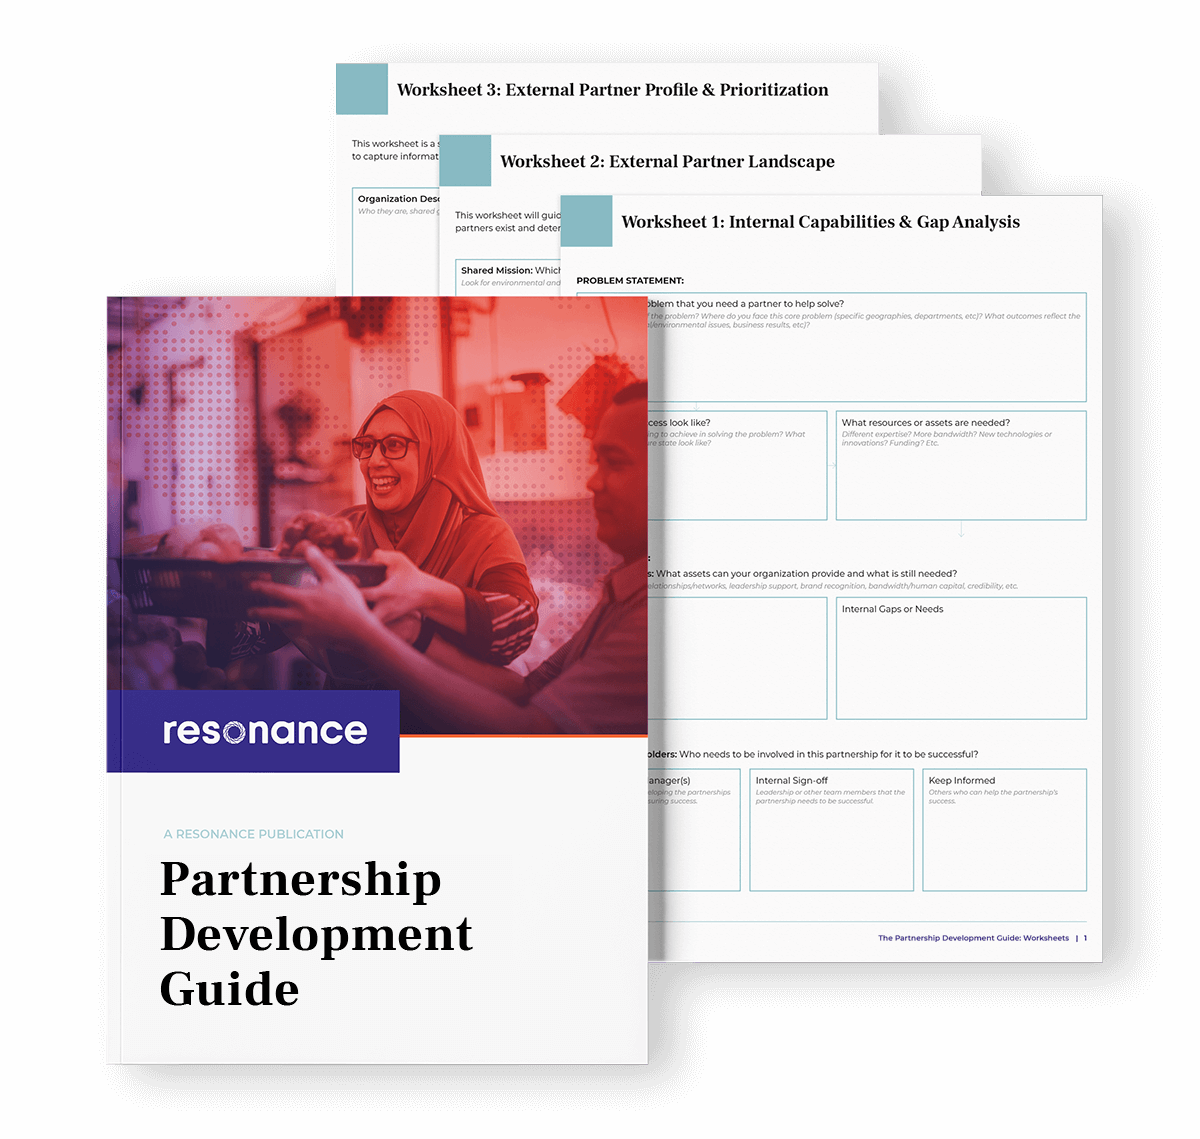 Partnership Development Toolkit Guide and Worksheets